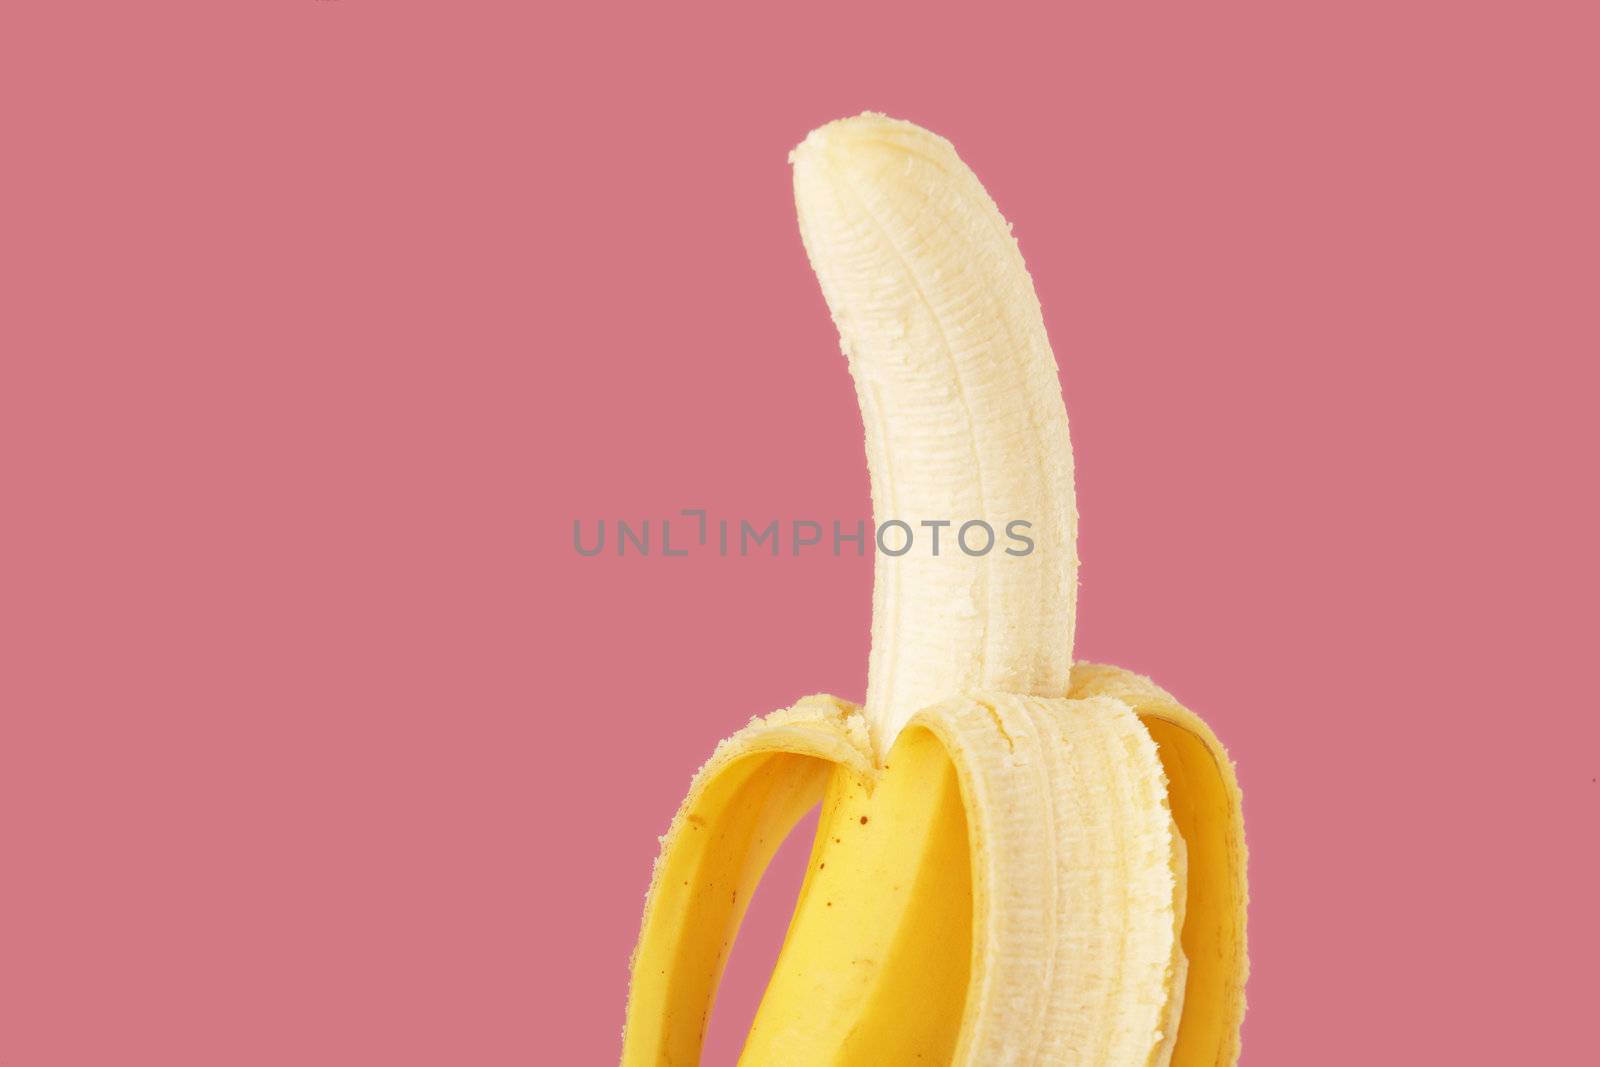 A banana ready for eating on pink background